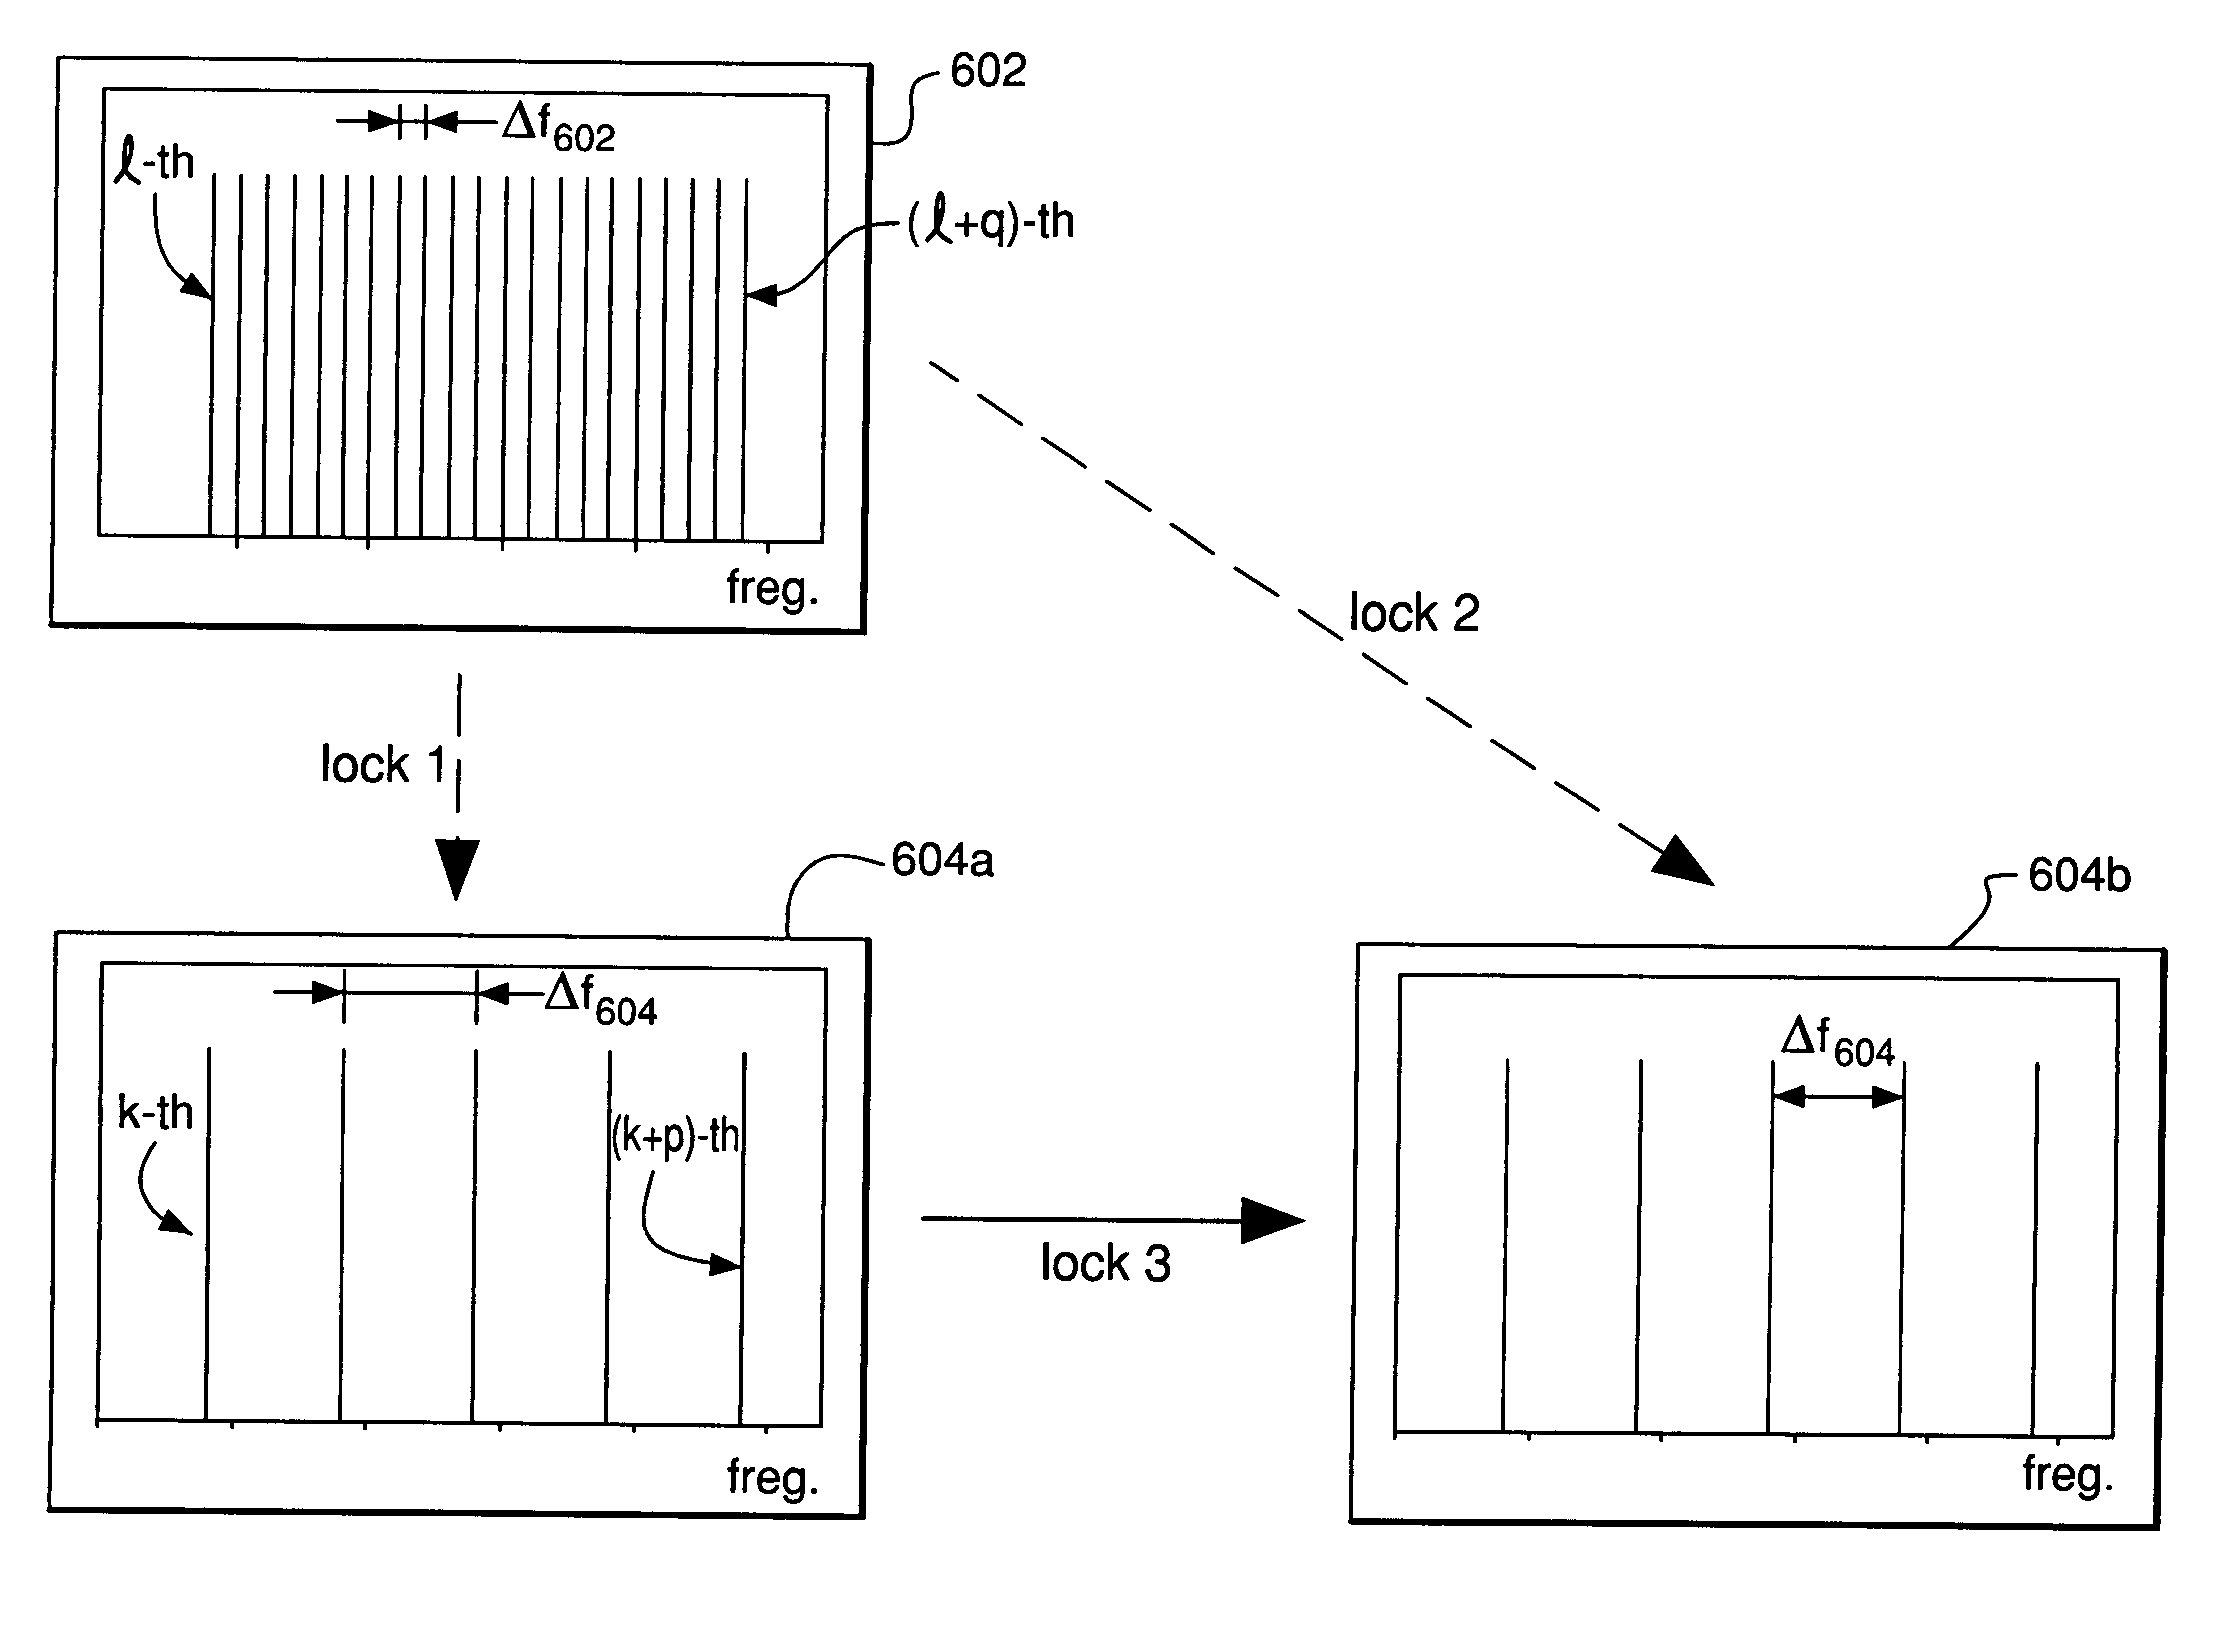 Cloning optical-frequency comb sources